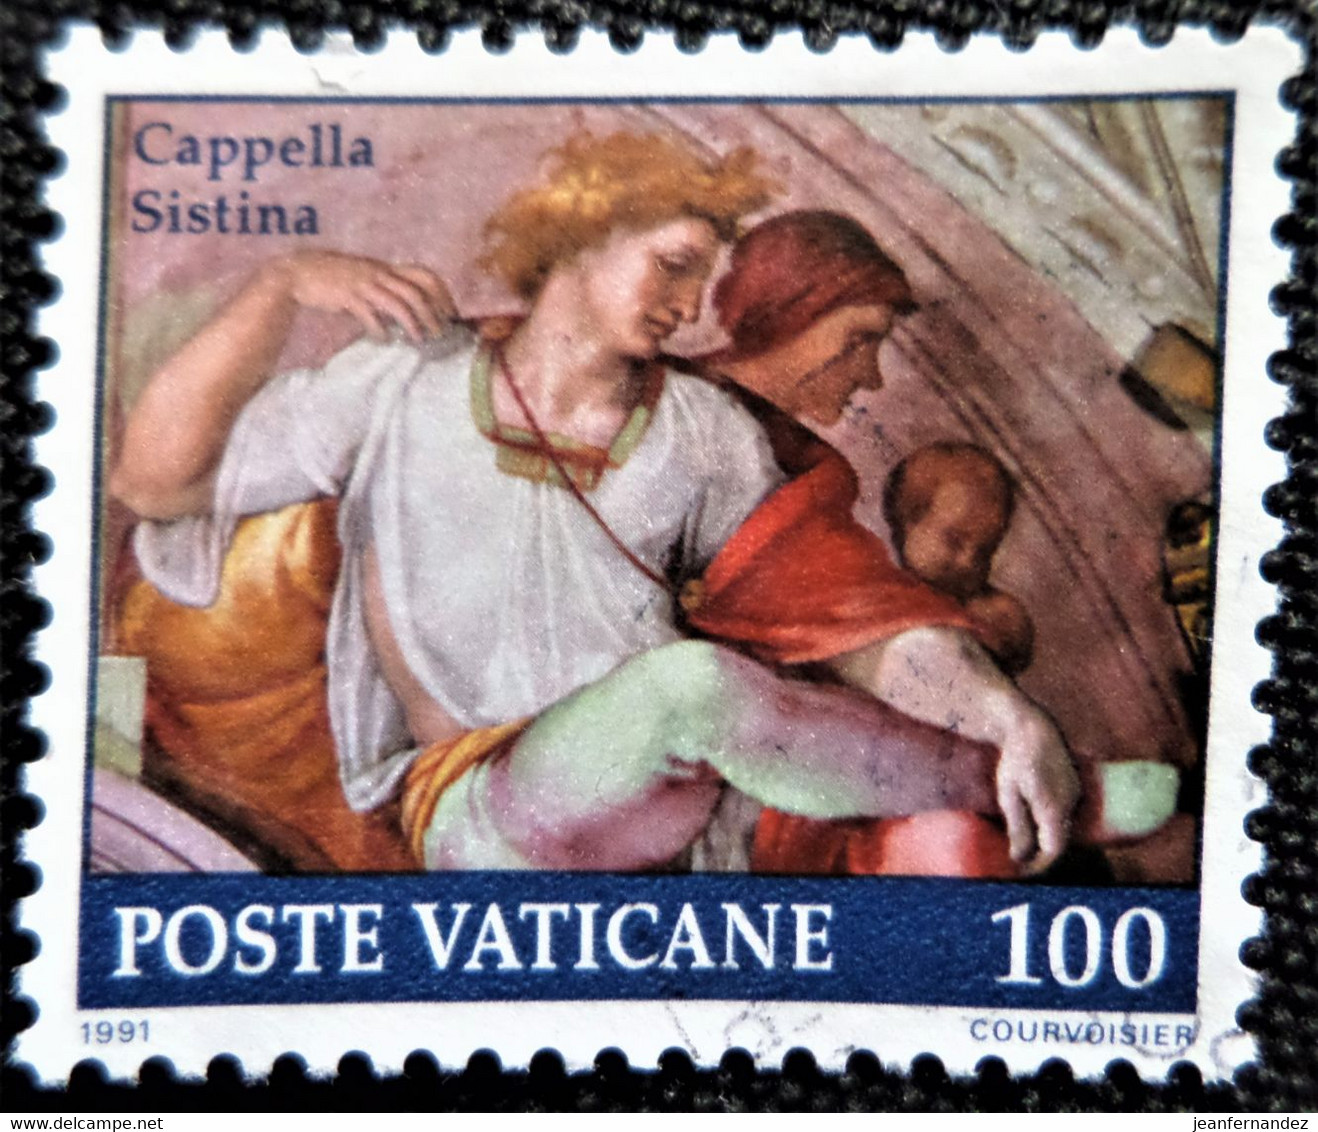 Timbre Du Vatican 1991 The Restoration Of The Sixtin Chapel  Stampworld N° 1023 - Usados